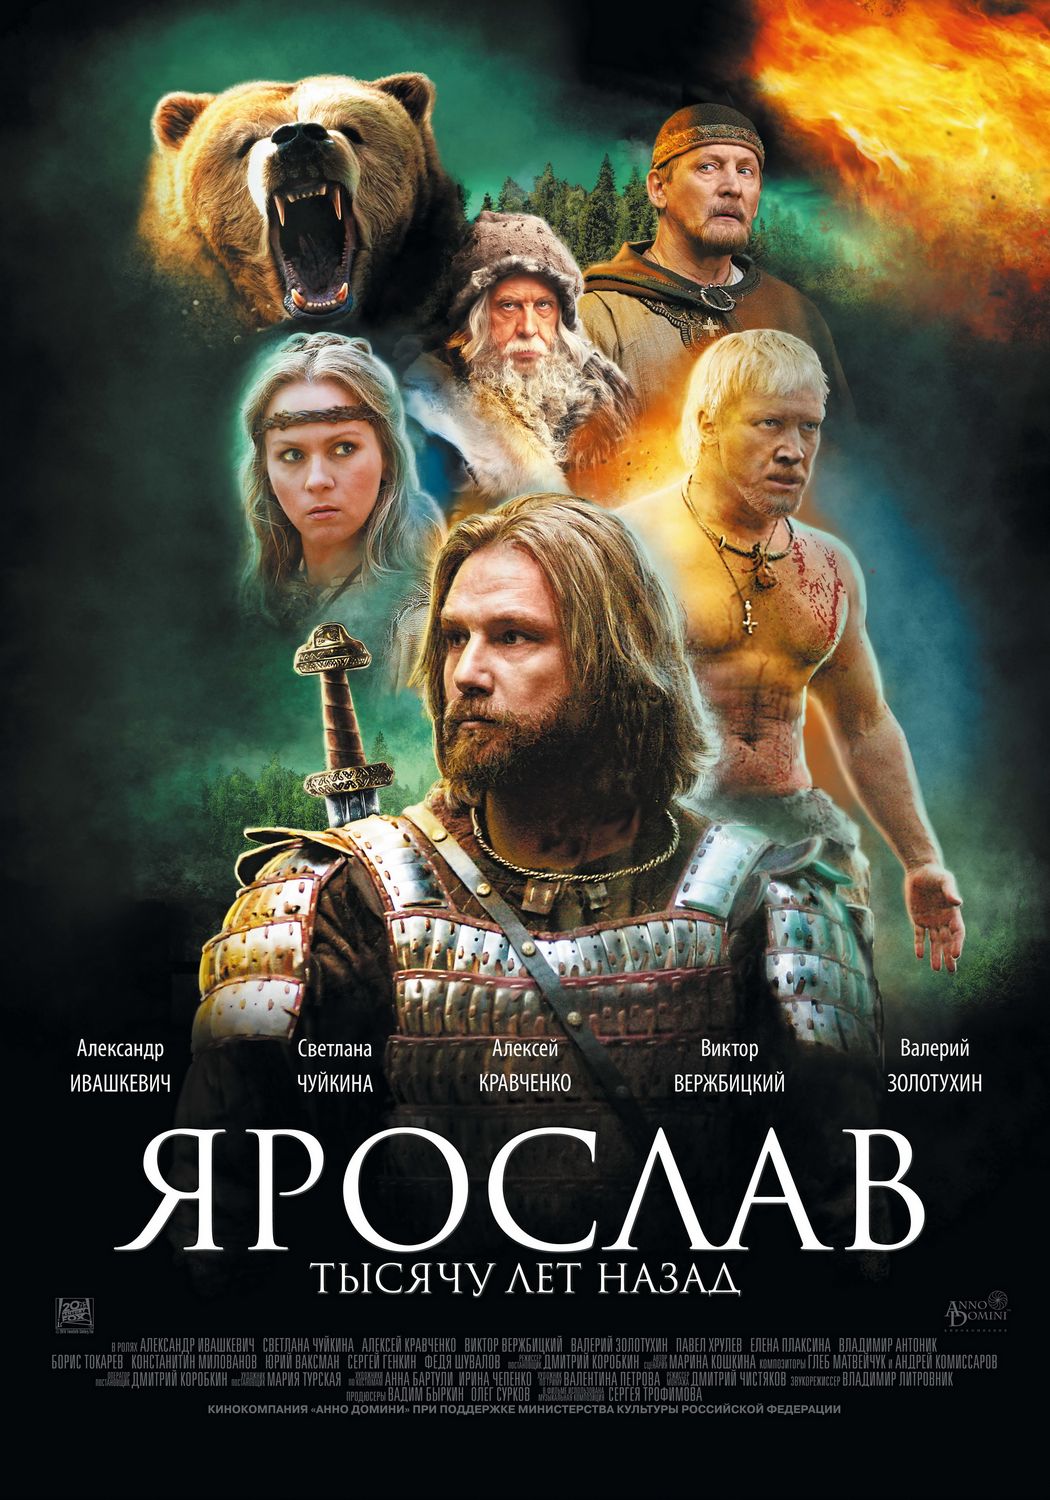 Extra Large Movie Poster Image for Yaroslav (#5 of 5)